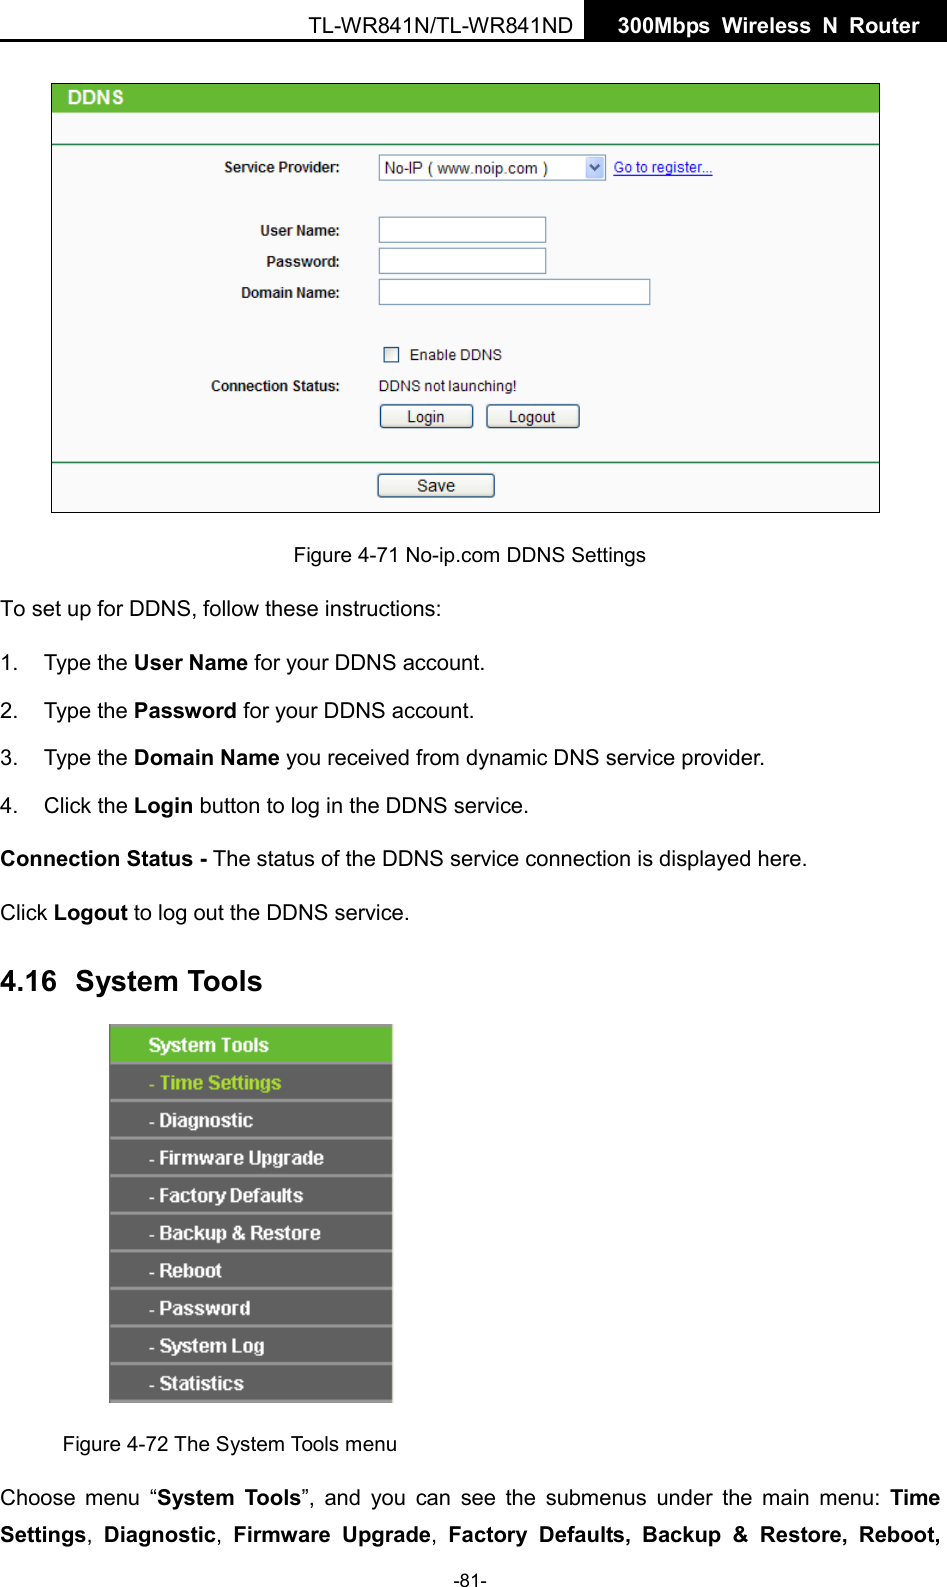  TL-WR841N/TL-WR841ND  300Mbps Wireless N  Router     Figure 4-71 No-ip.com DDNS Settings To set up for DDNS, follow these instructions: 1. Type the User Name for your DDNS account.   2. Type the Password for your DDNS account.   3. Type the Domain Name you received from dynamic DNS service provider. 4. Click the Login button to log in the DDNS service. Connection Status - The status of the DDNS service connection is displayed here. Click Logout to log out the DDNS service. 4.16 System Tools  Figure 4-72 The System Tools menu Choose menu “System Tools”, and you can see the submenus under the main menu: Time Settings,  Diagnostic,  Firmware Upgrade,  Factory Defaults,  Backup &amp; Restore, Reboot, -81- 